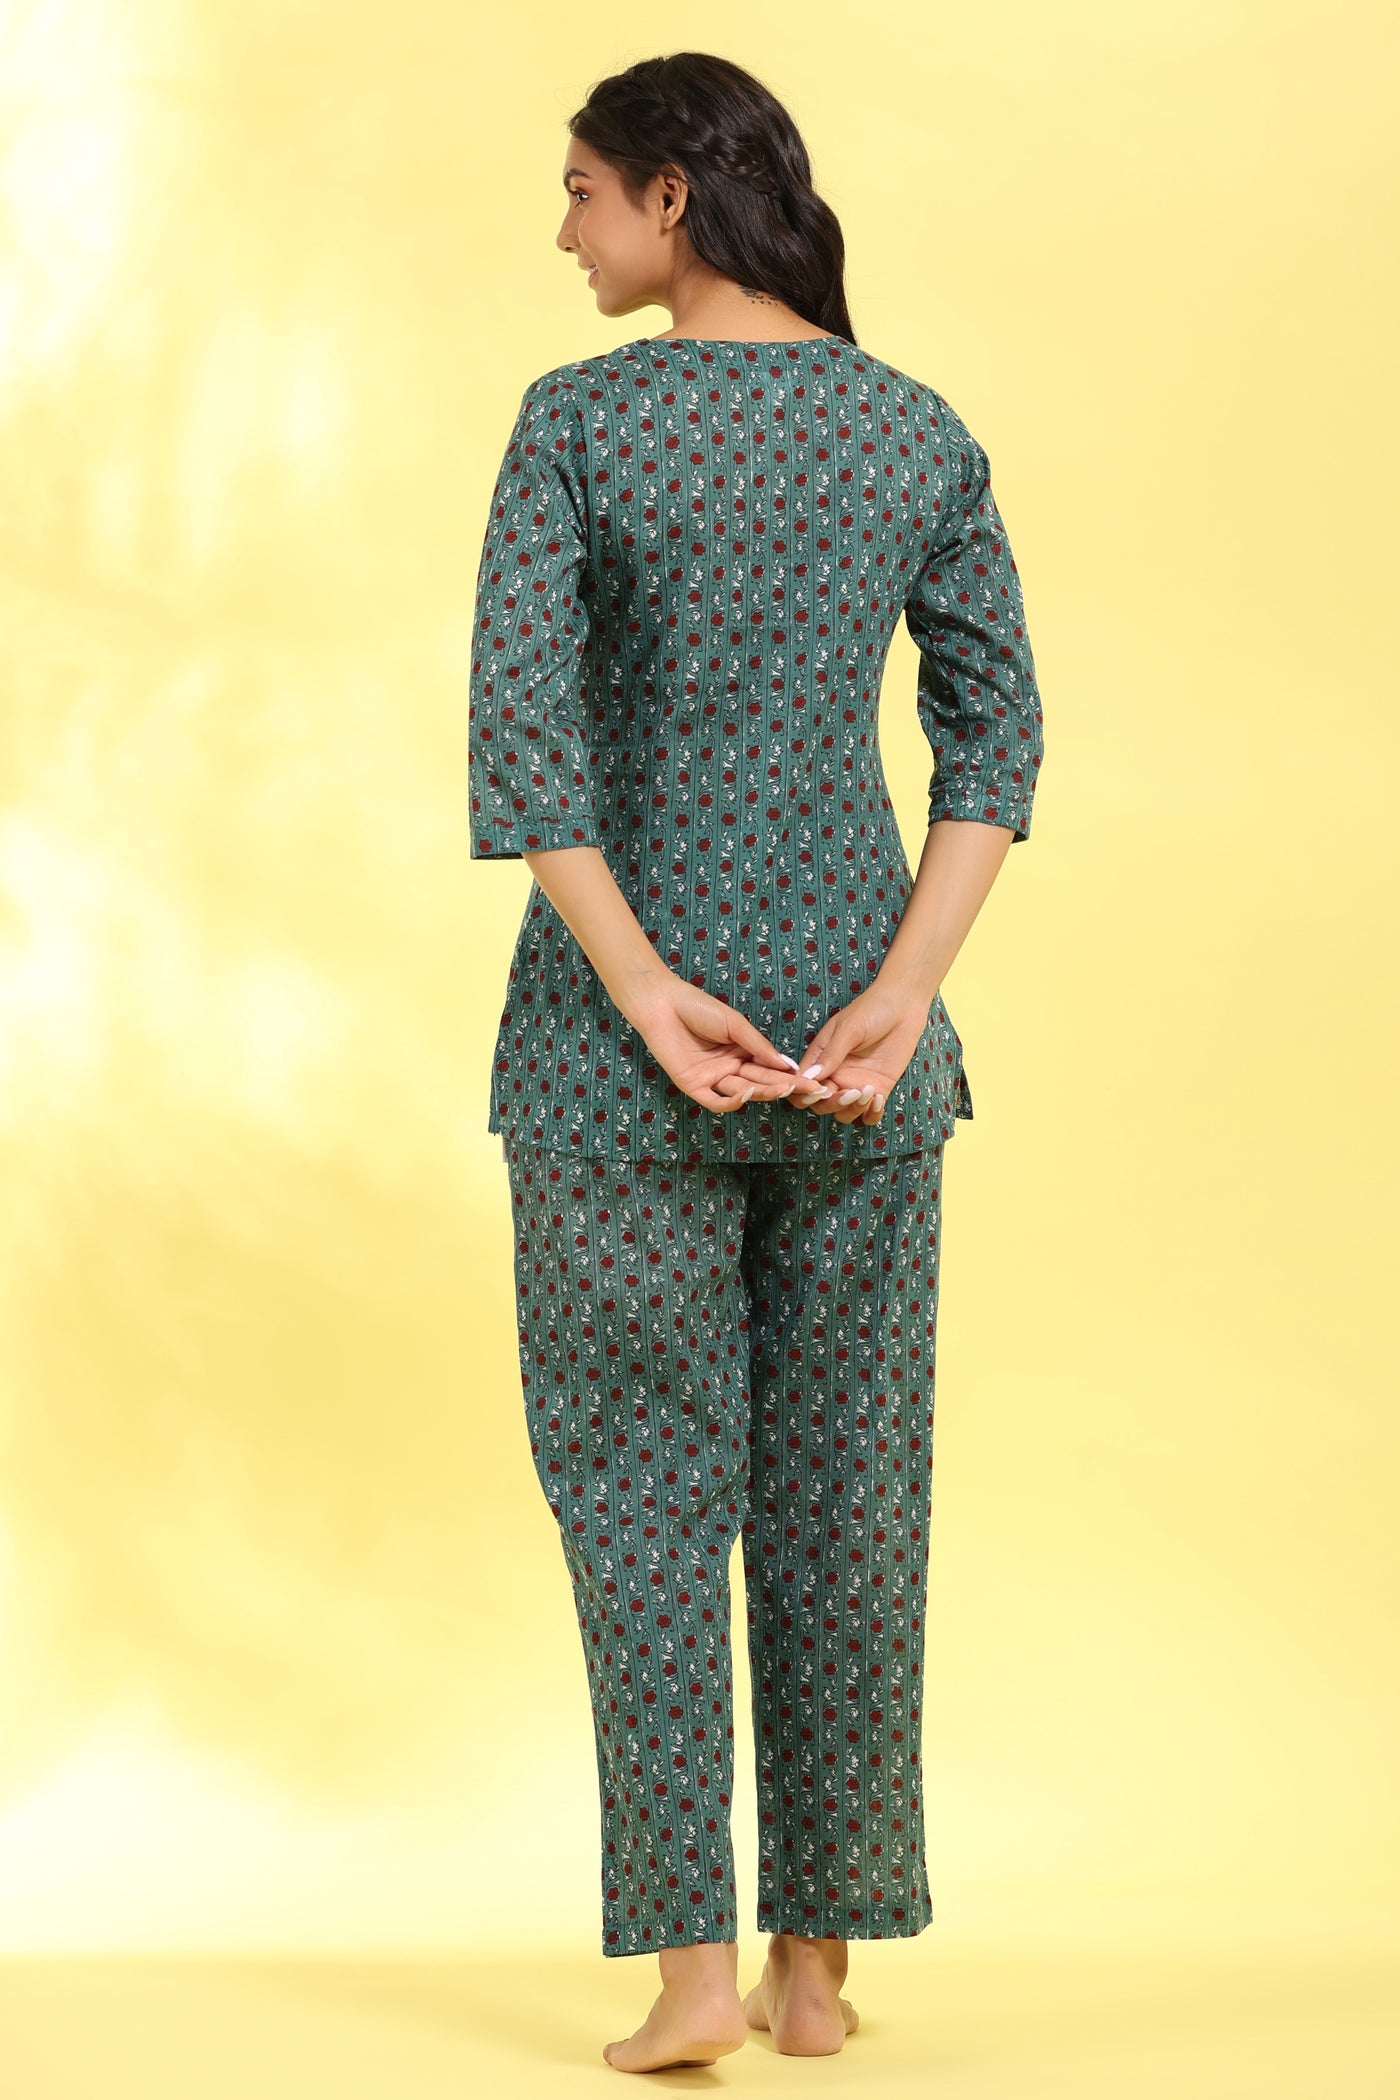 Patterned Floral Stripes on Green Loungewear